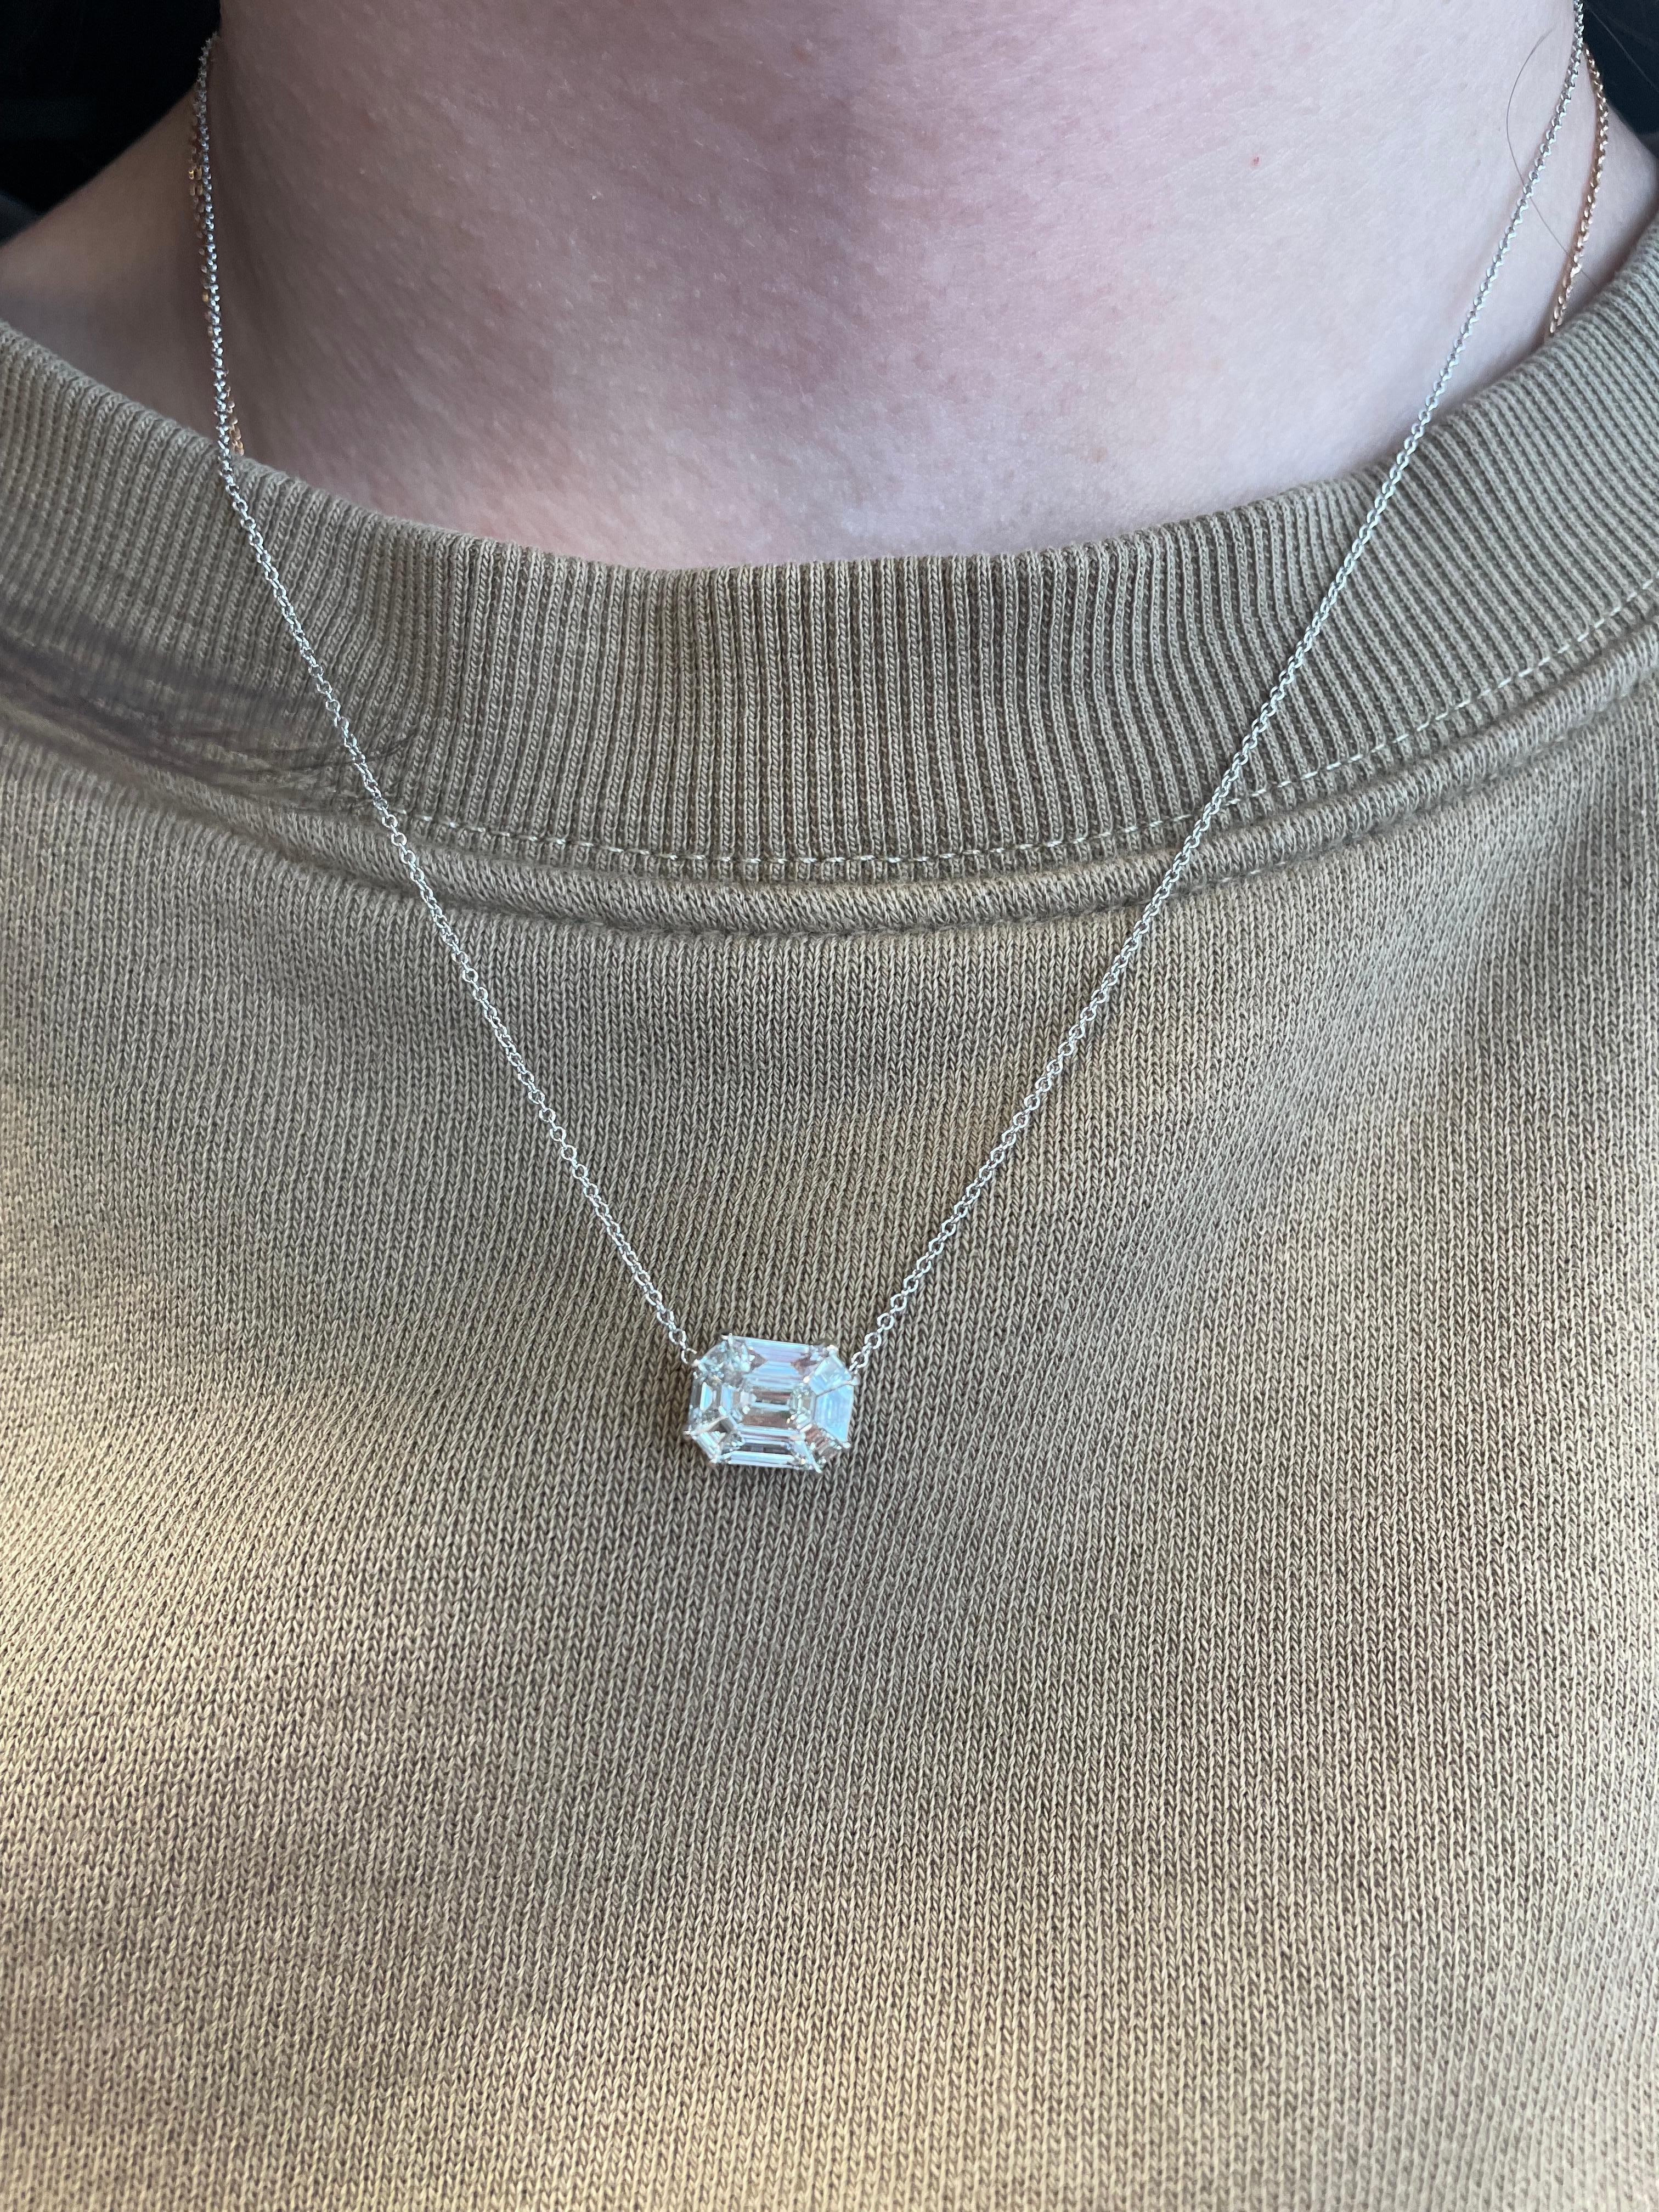 Stunning illusion set diamond pendant necklace, with the look of a 3ct emerald cut diamond. Created by Alexander Beverly Hills.
0.88ct of an emerald cut and trapezoid cut diamonds. Approximately G/H color and VS clarity. 18k white gold, 16